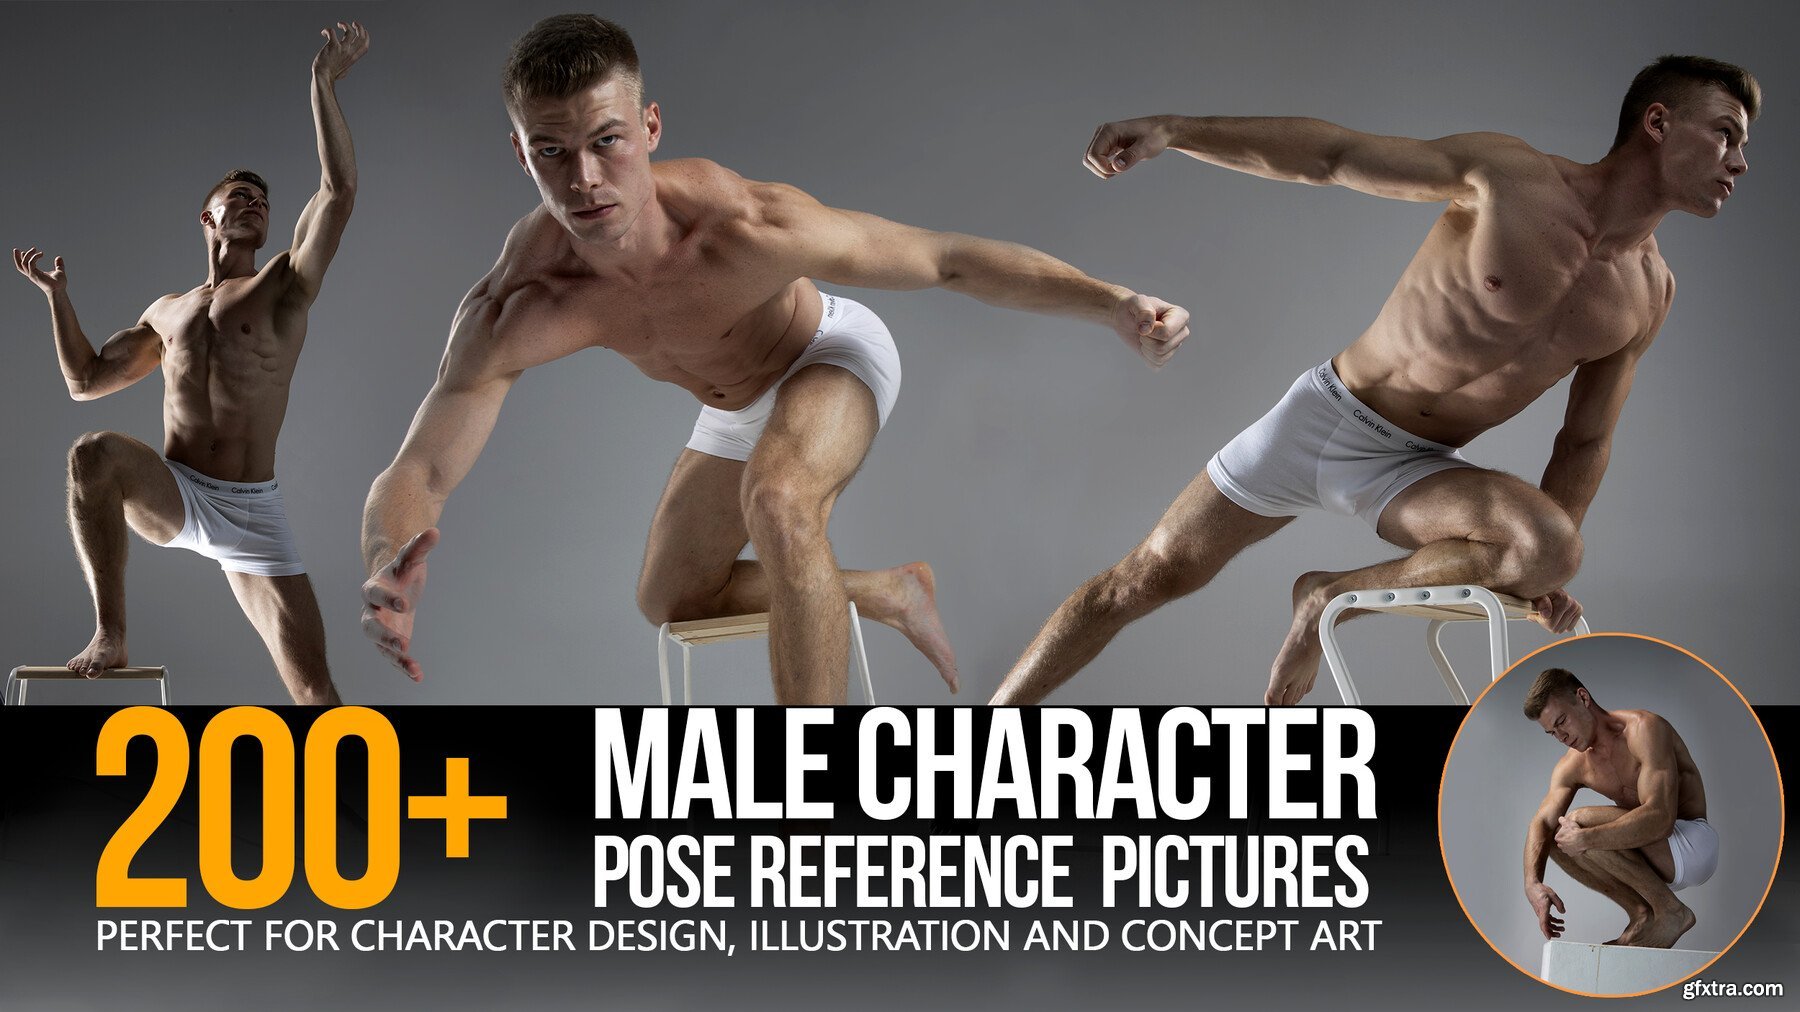 Artstation - Grafit Studio - 200+ Male Pose Reference Pictures » GFxtra